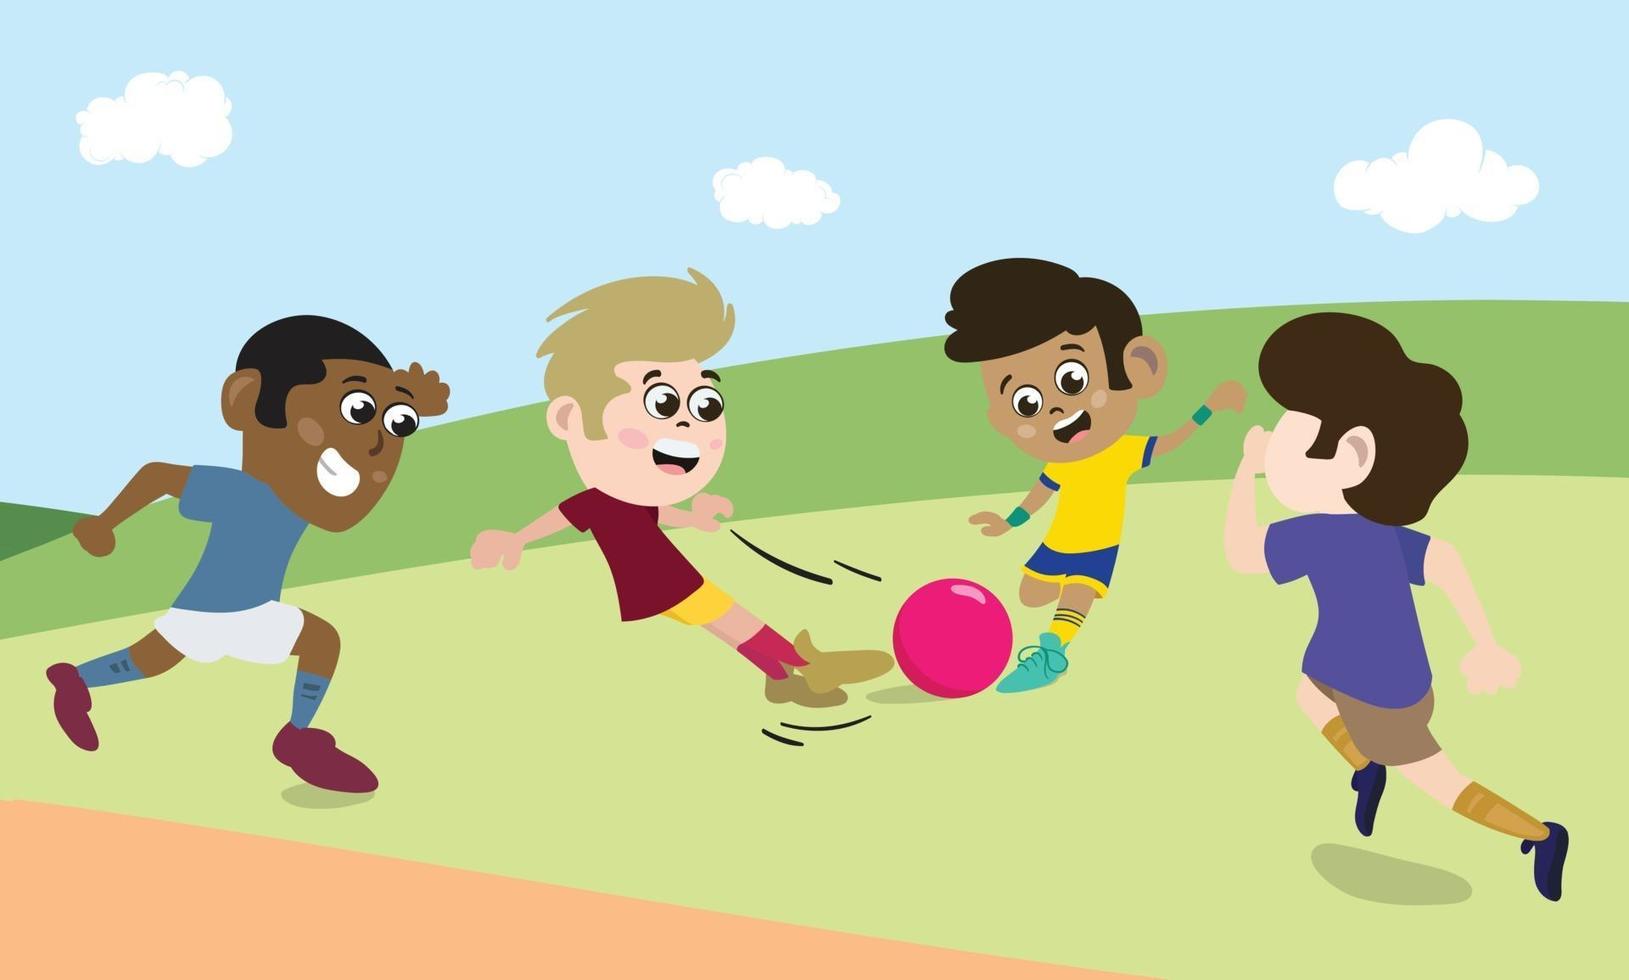 Mixed Race boys playing soccer or football in playground vector